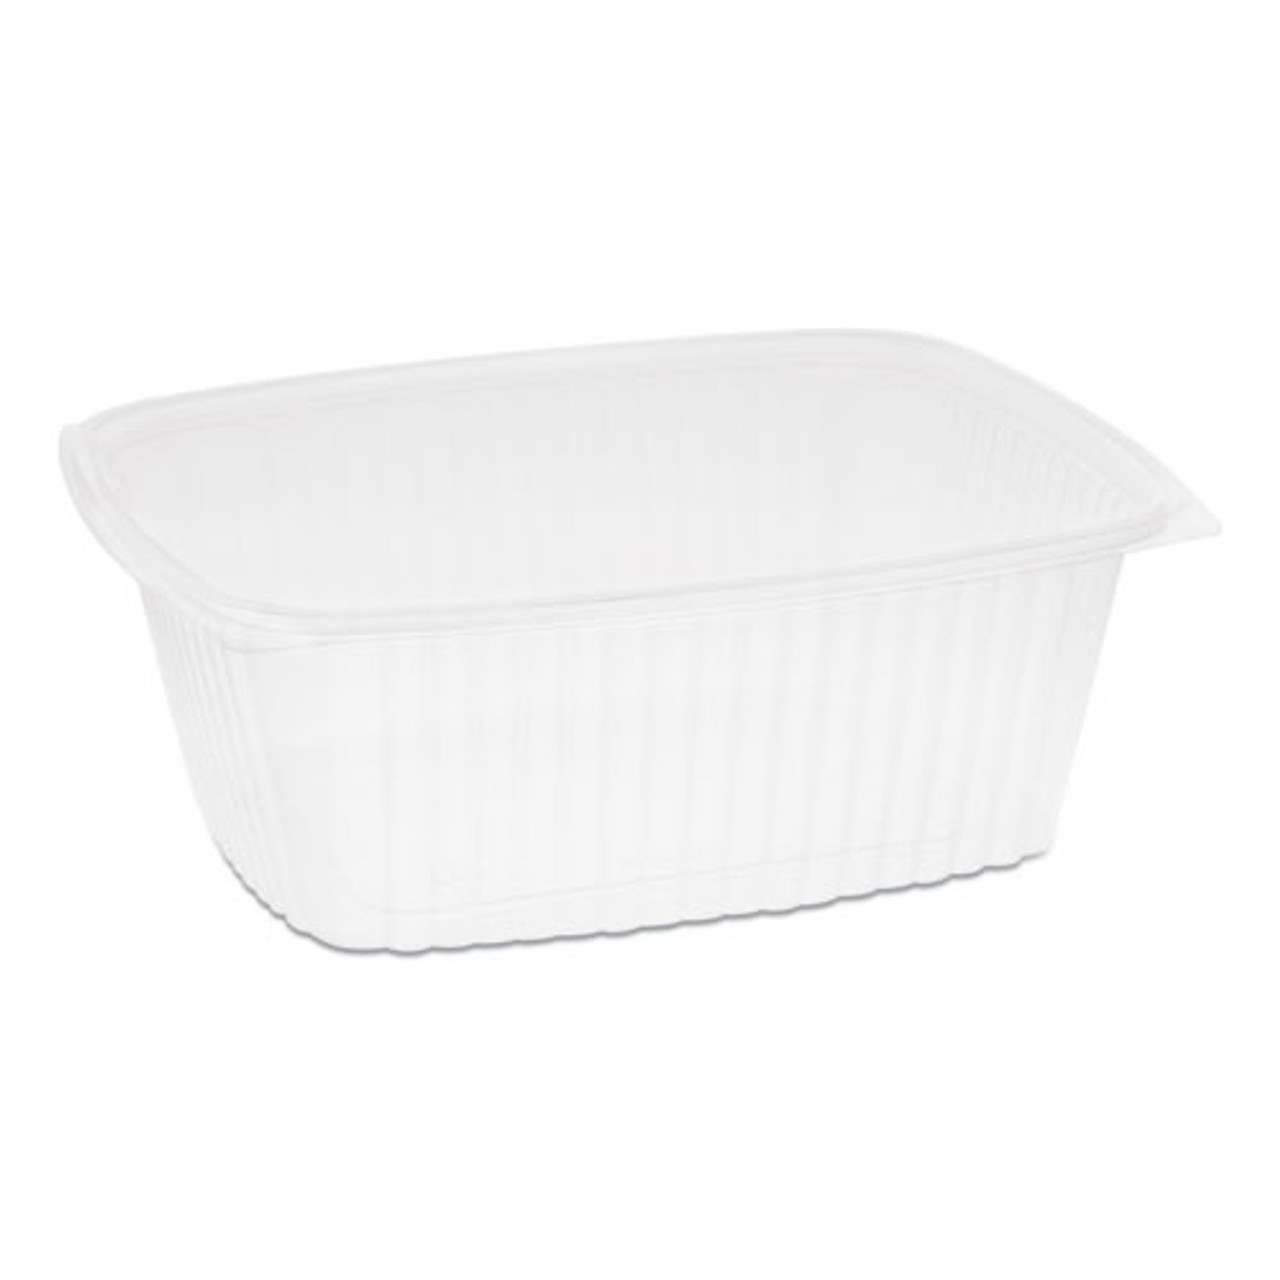 EarthChoice Pet Container Bases 4-Compartment 32 oz 6.13 x 6.13 x 2.61 Clear 360/Carton